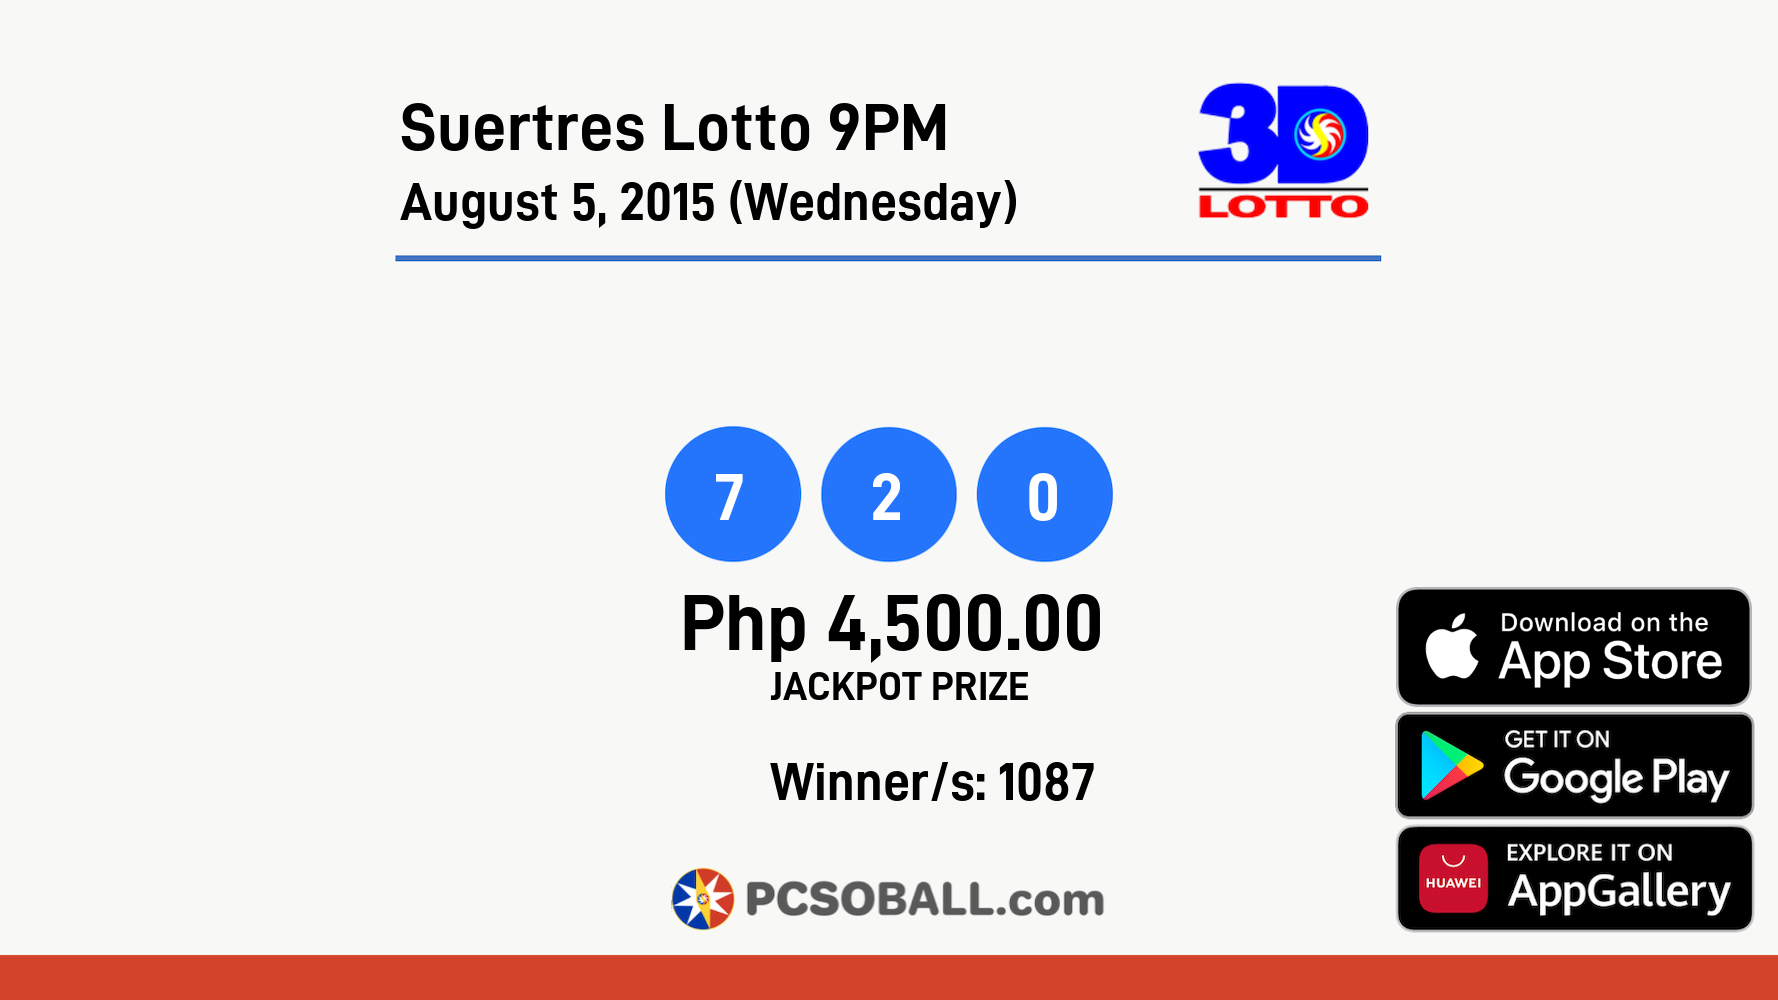 Suertres Lotto 9PM August 5, 2015 (Wednesday) Result